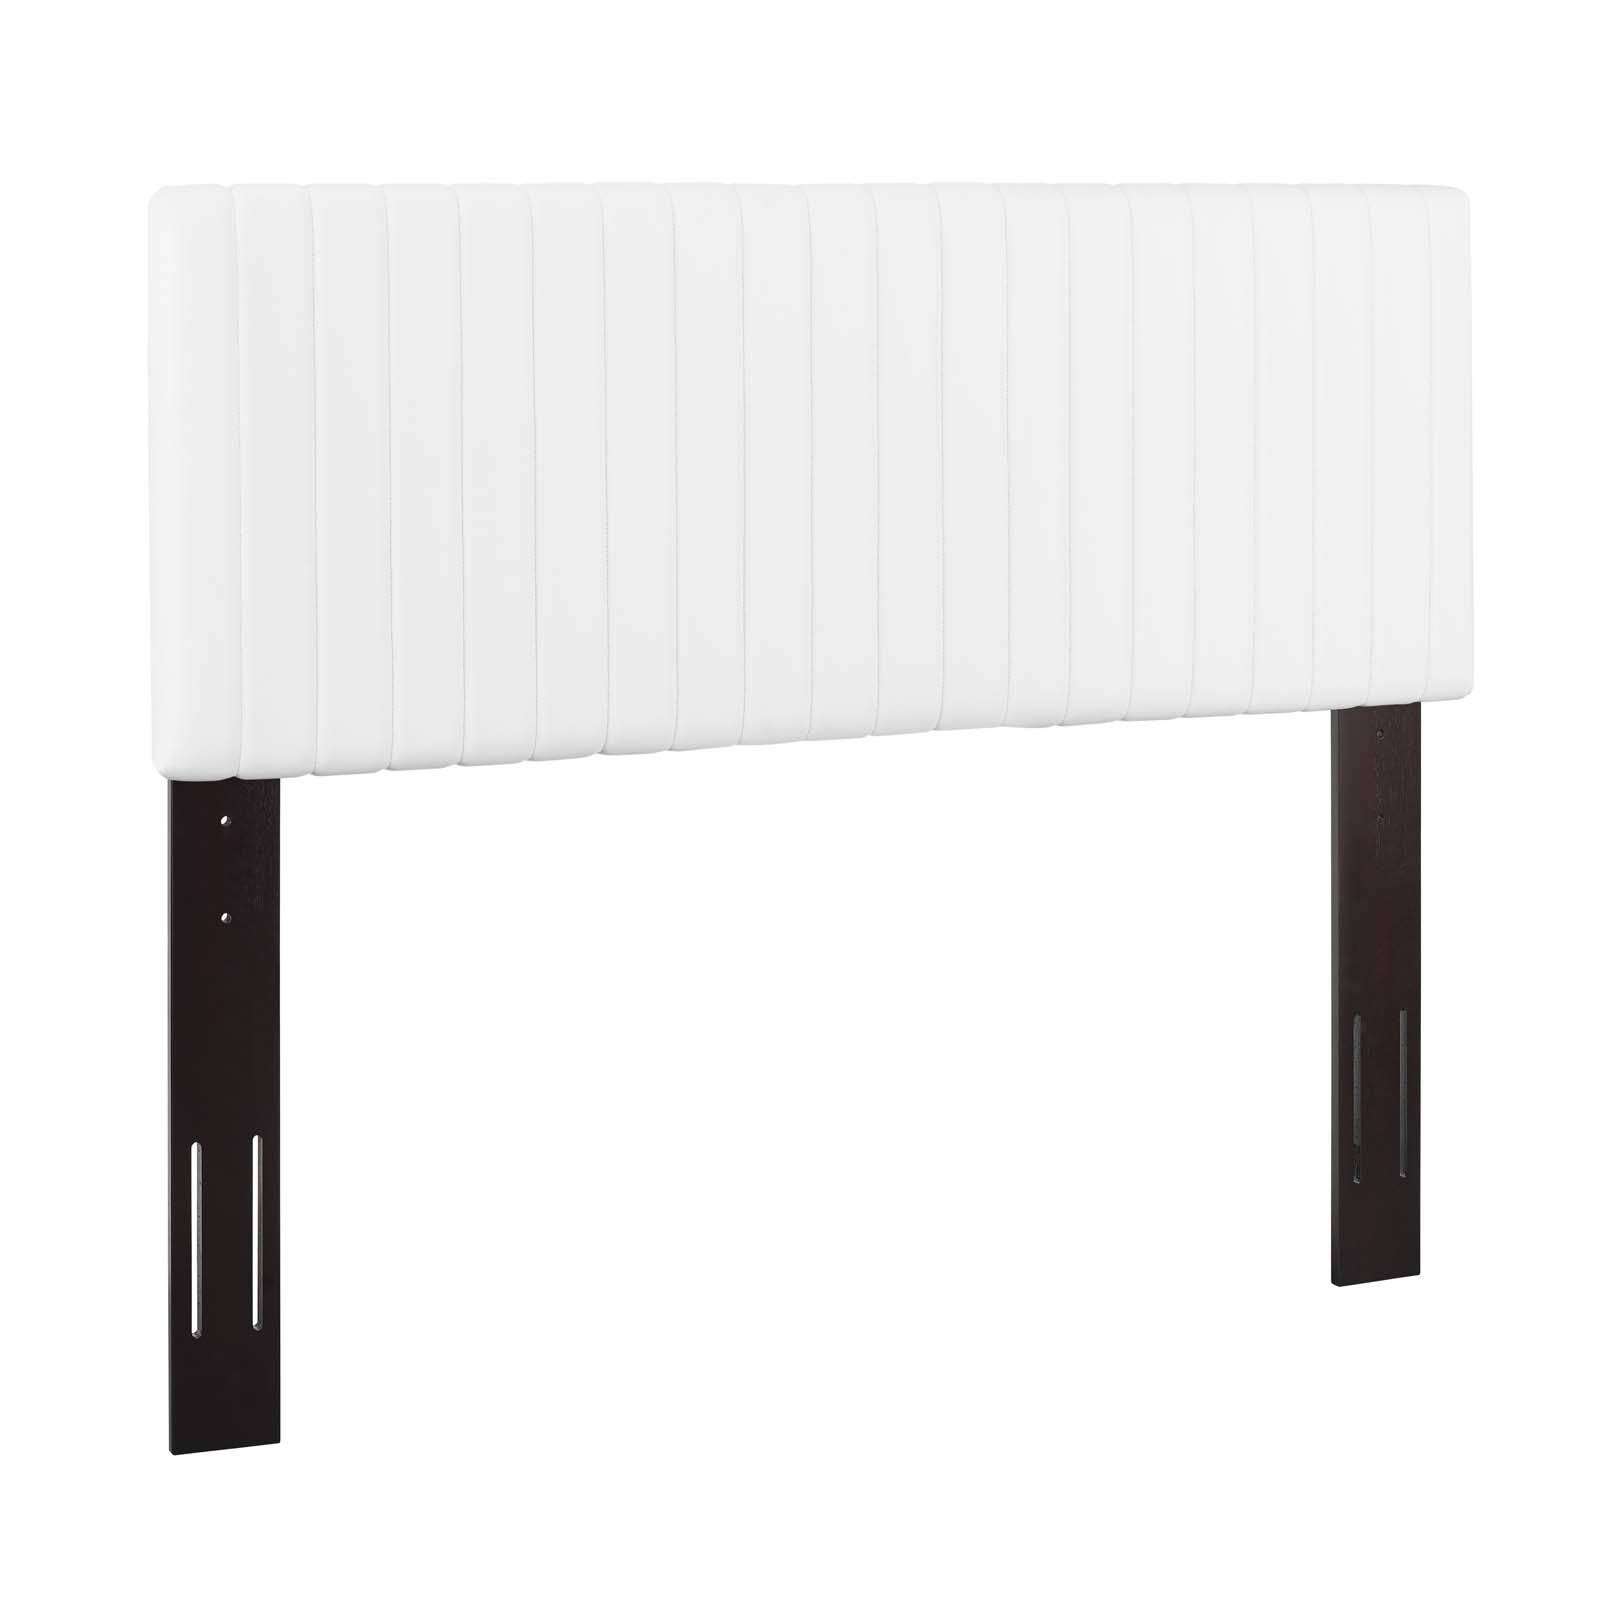 Keira Full Queen Faux Leather Headboard, White Leather Headboard Full